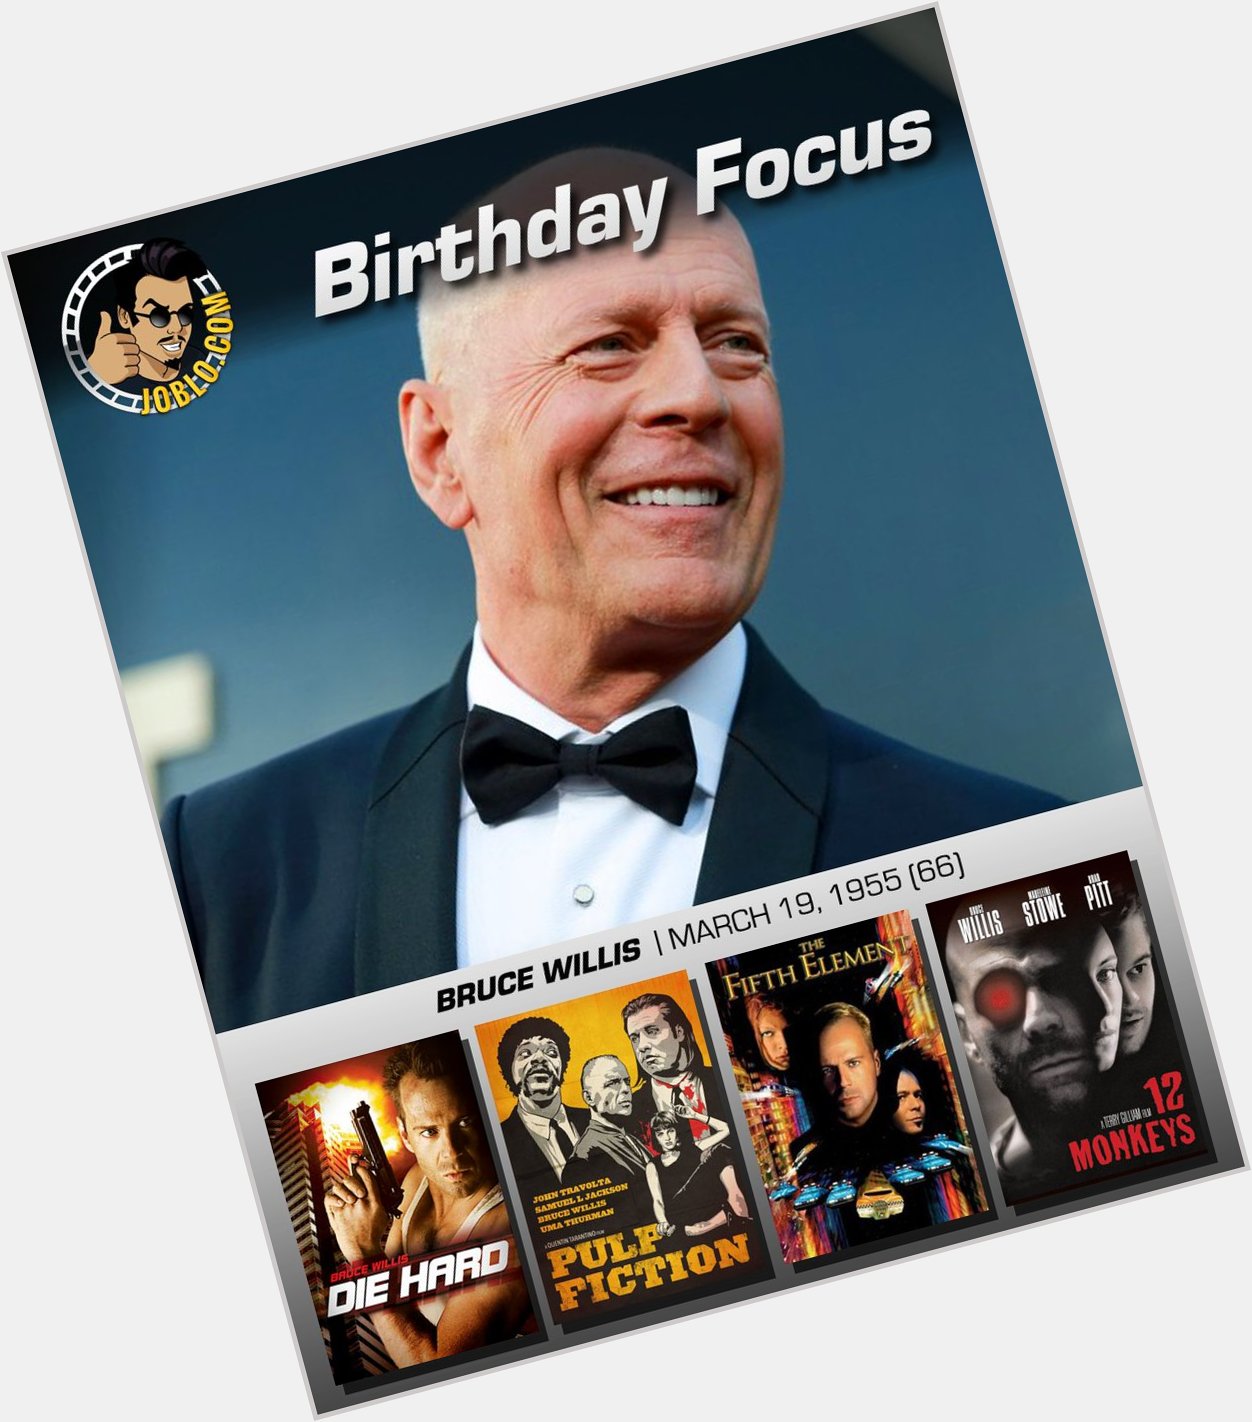 Wishing a very happy 66th birthday to Bruce Willis! 